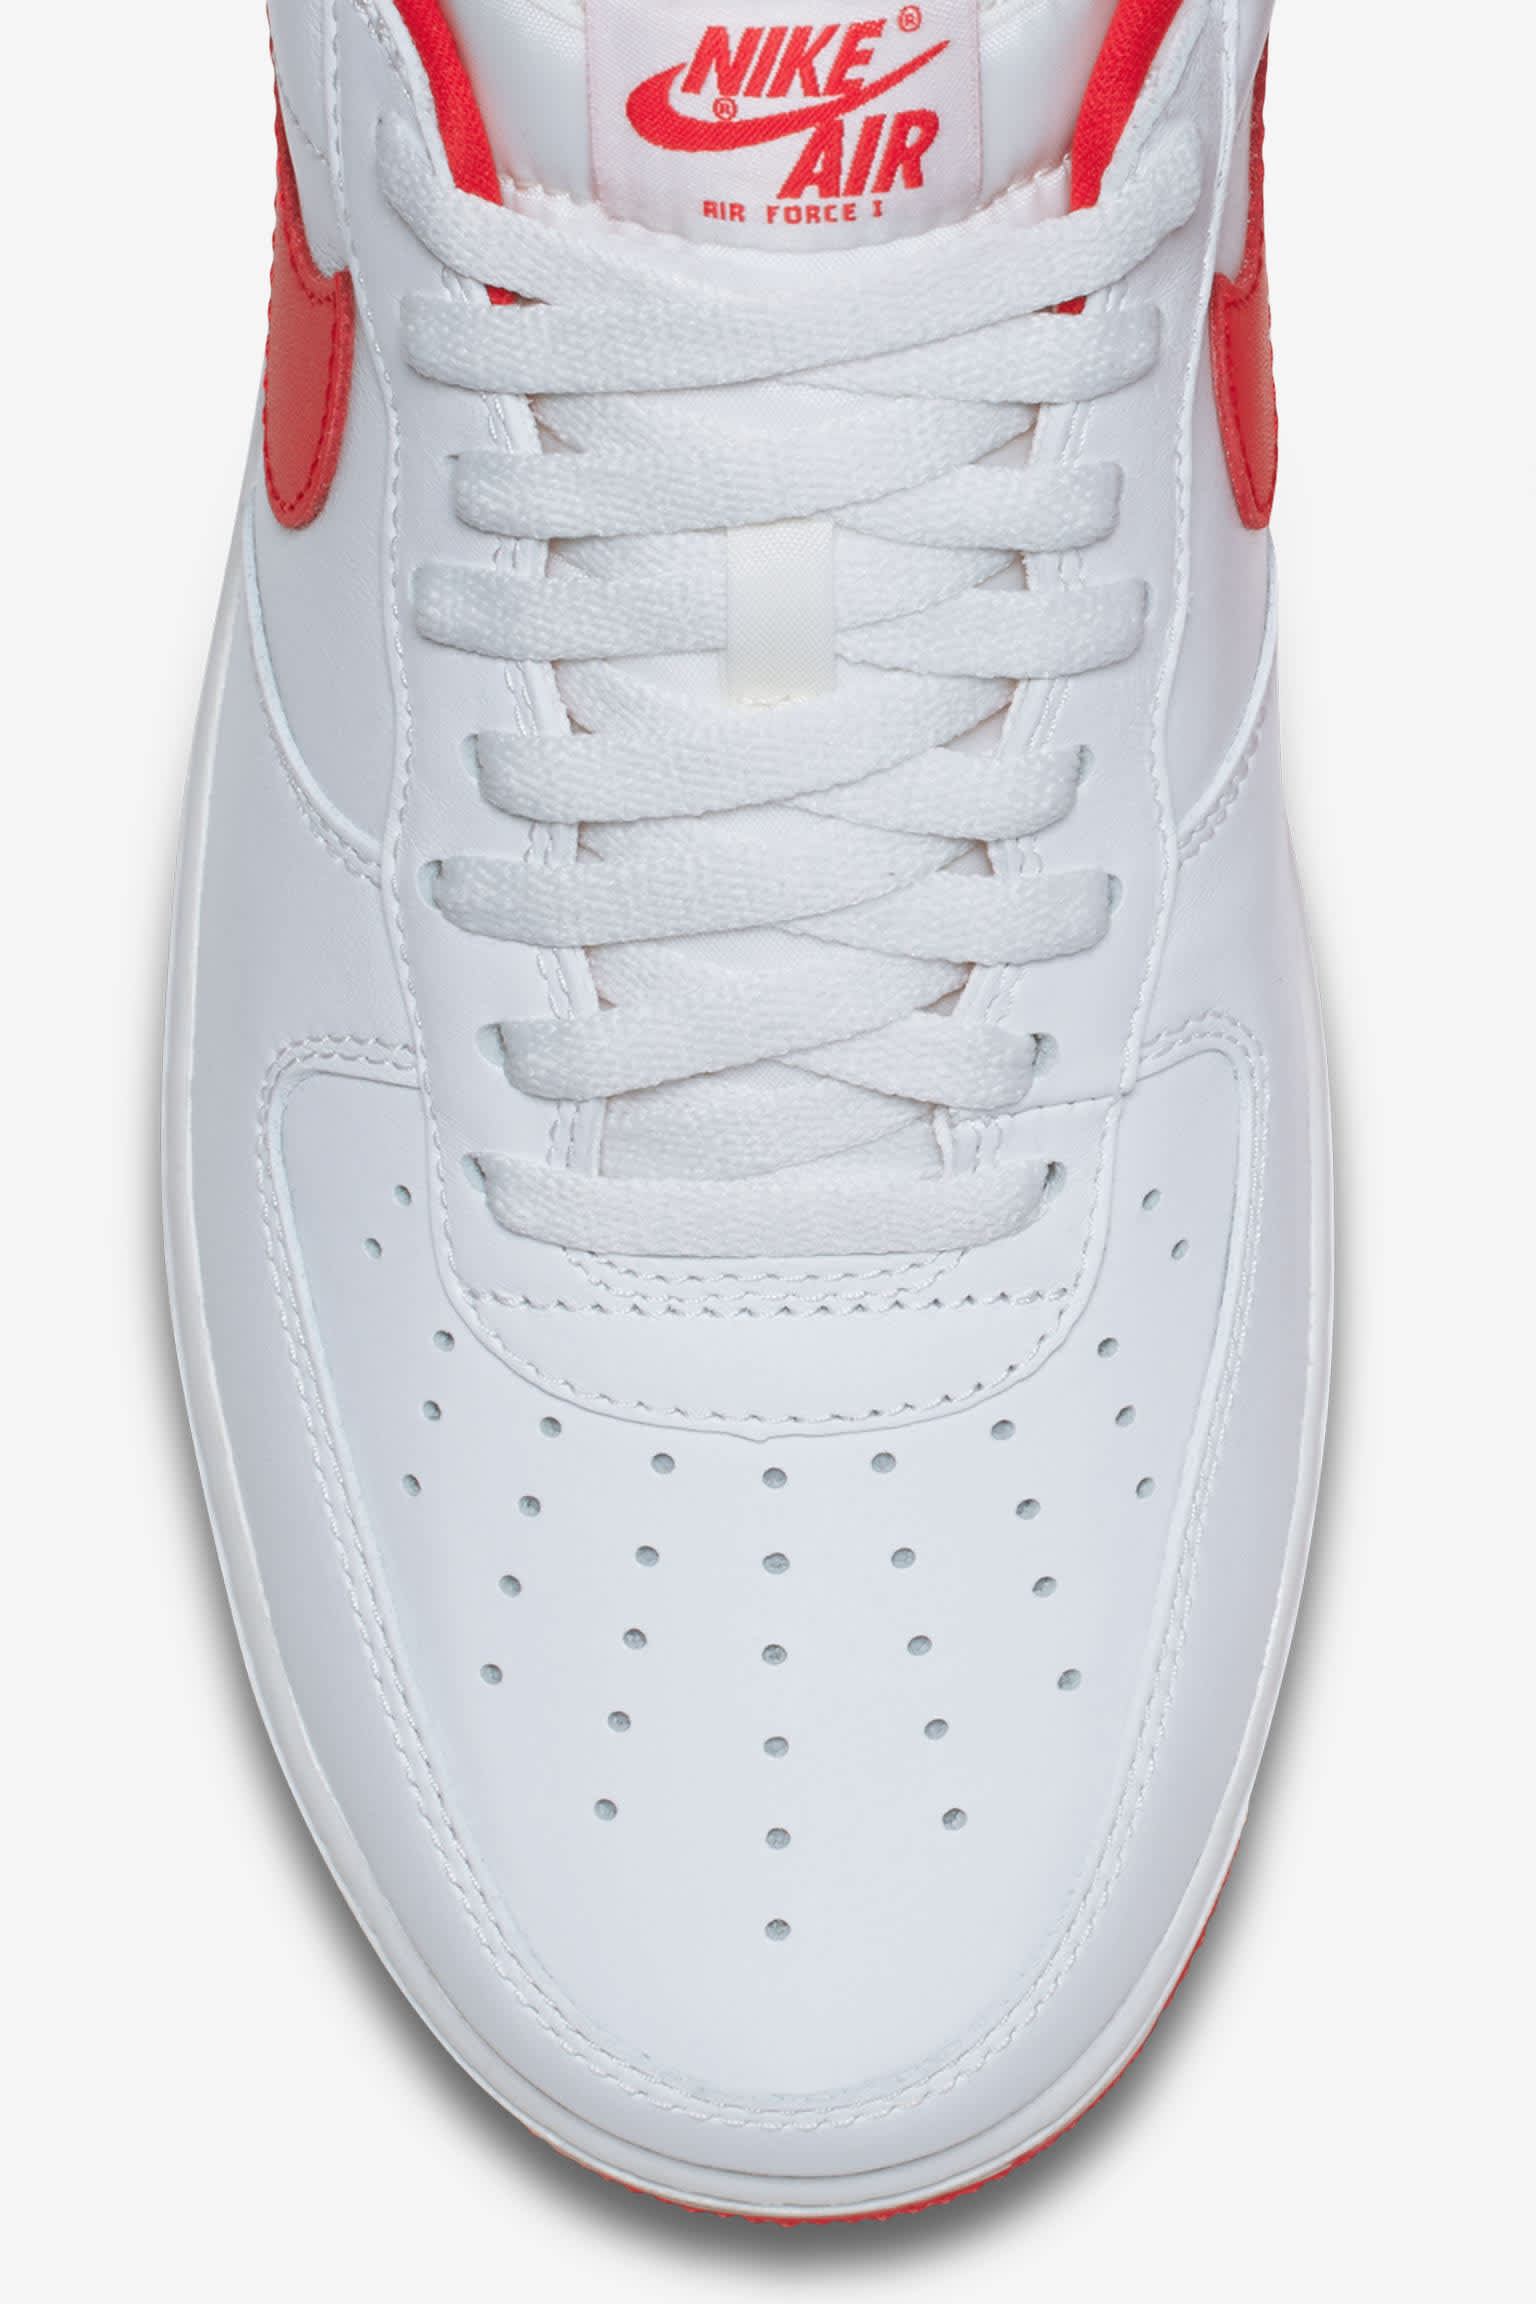 transferir réplica buffet Nike Air Force 1 Low Retro 'White & University Red' Release Date. Nike SNKRS